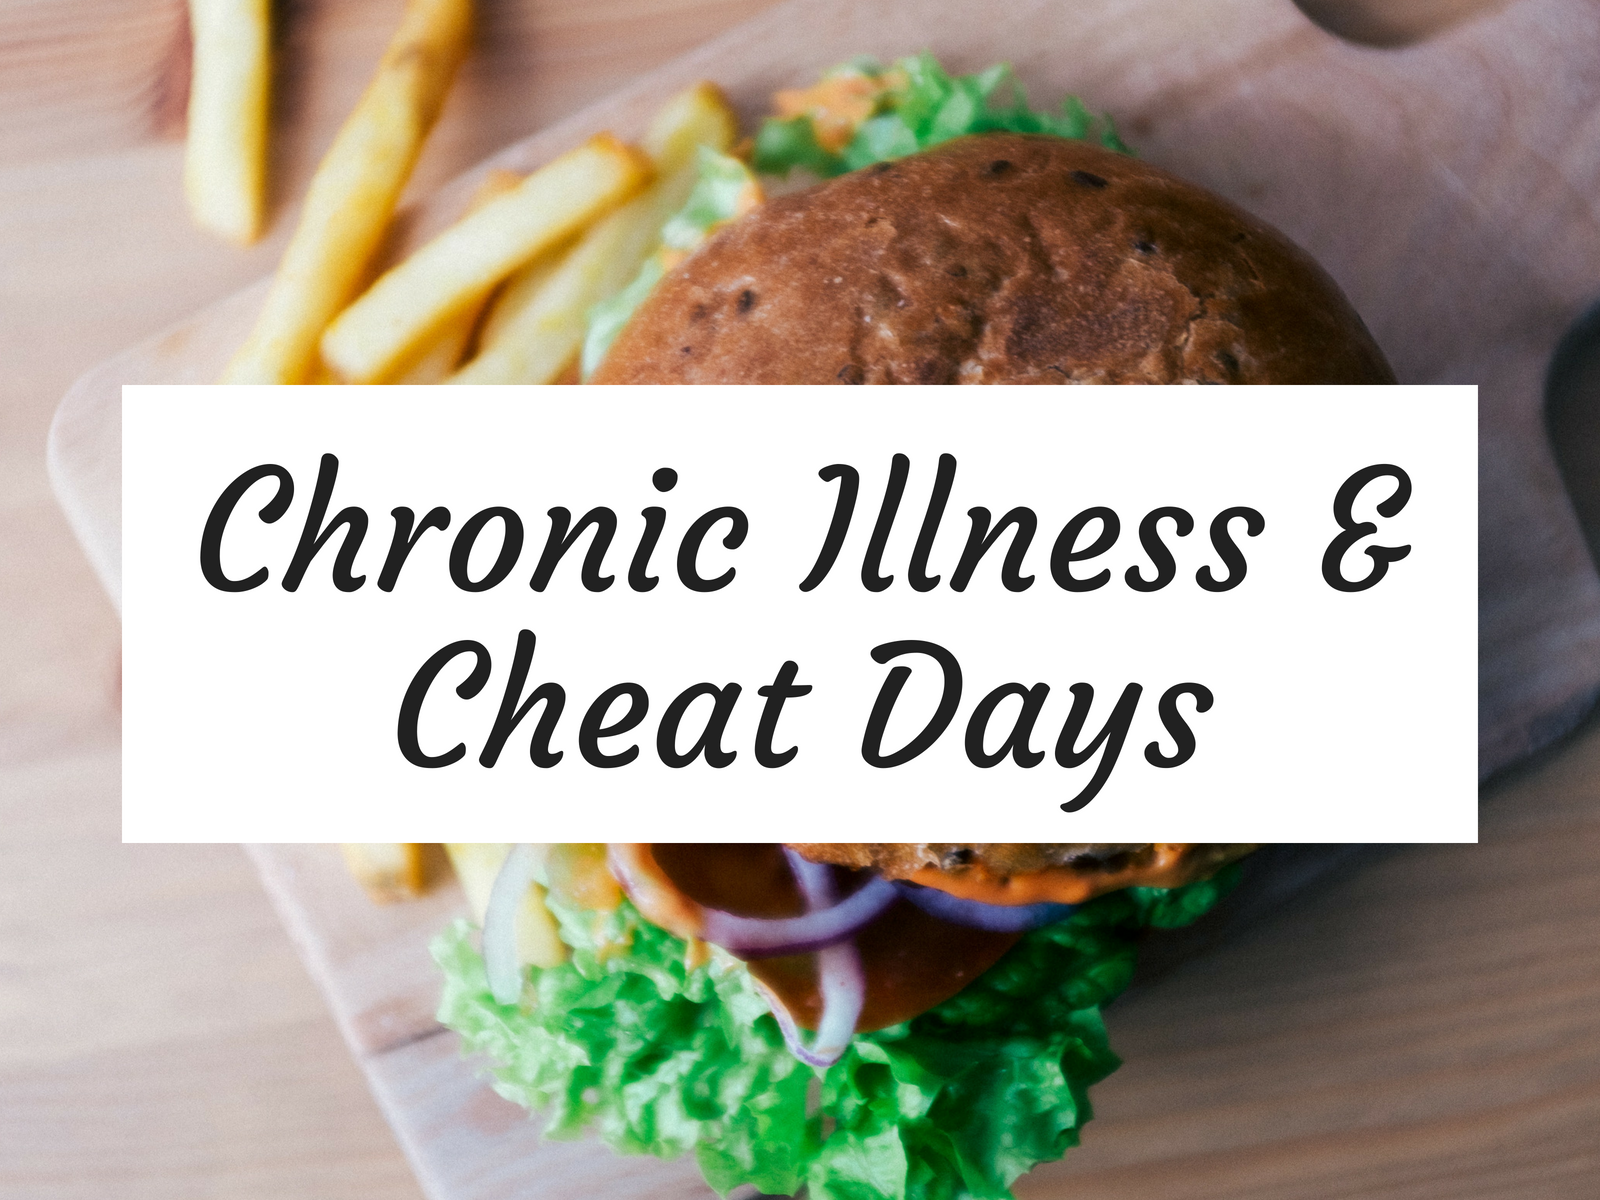 Chronic Illness & Cheat Days - If you are thinking about changing your diet and eliminating foods for your health, know a few things about chronic illness and cheat days.